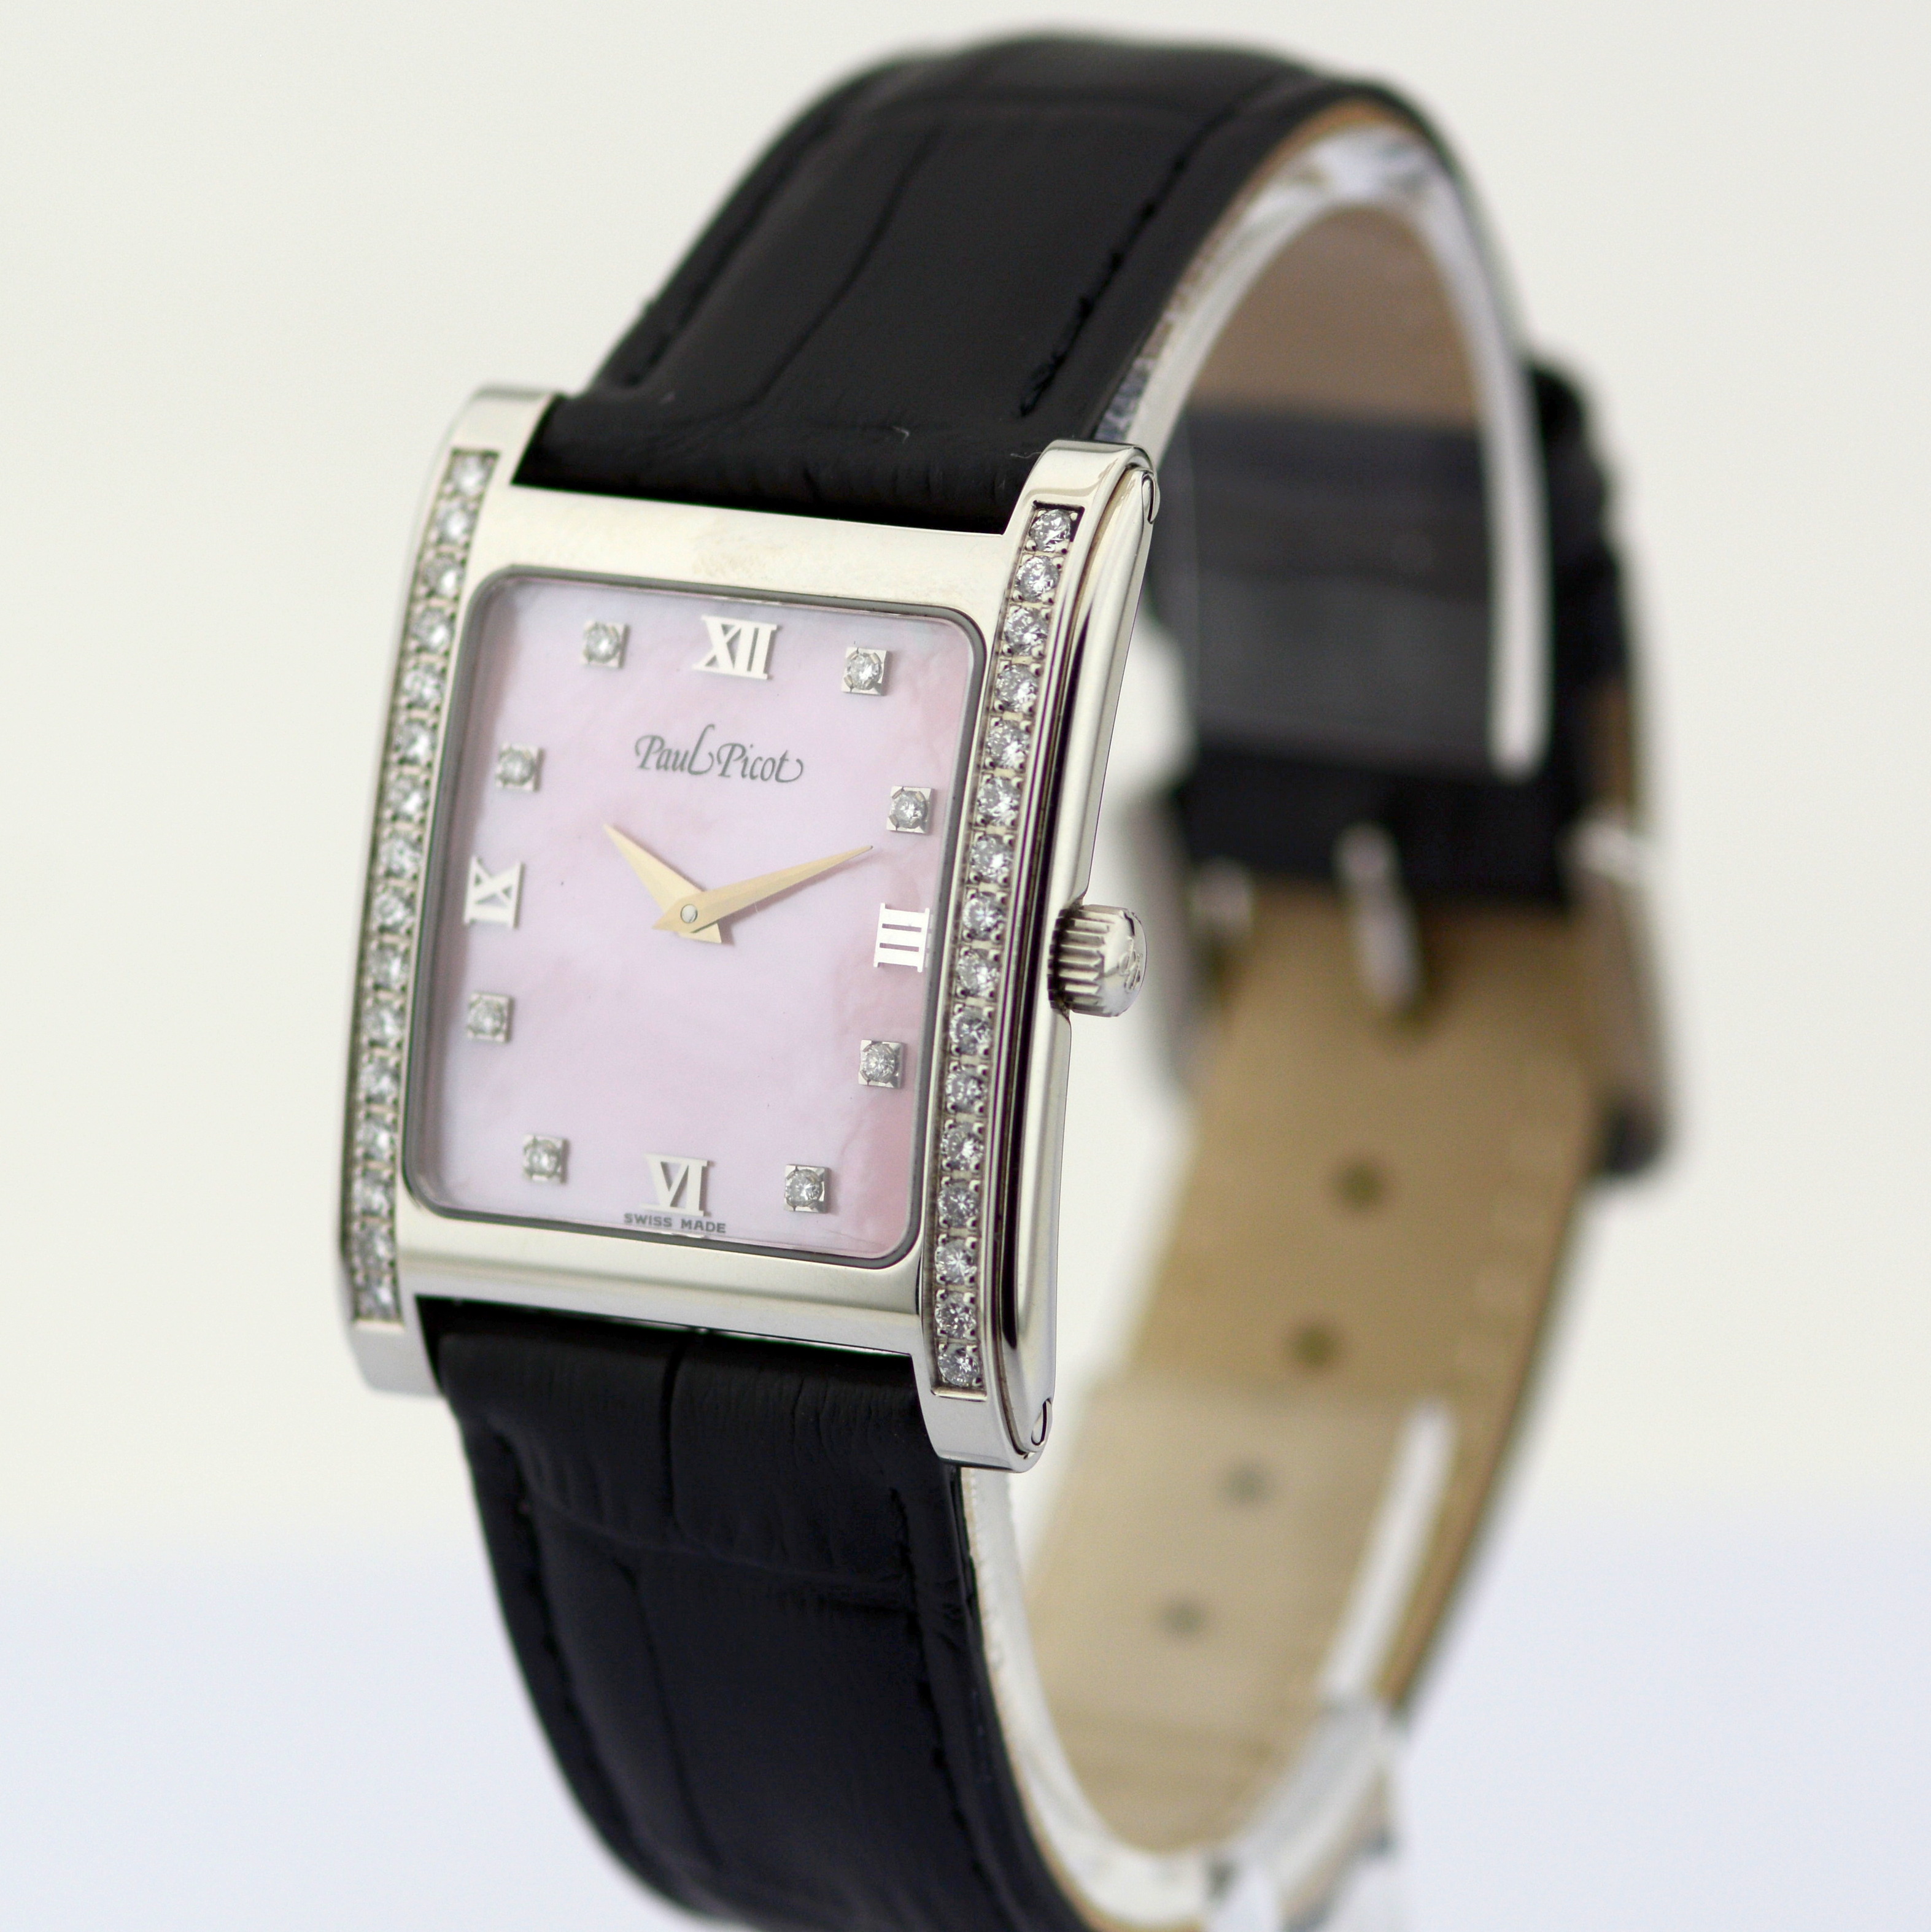 Paul Picot / 4079 Diamond Dial Diamond Case Mother of pearl - Lady's Steel Wrist Watch - Image 7 of 12